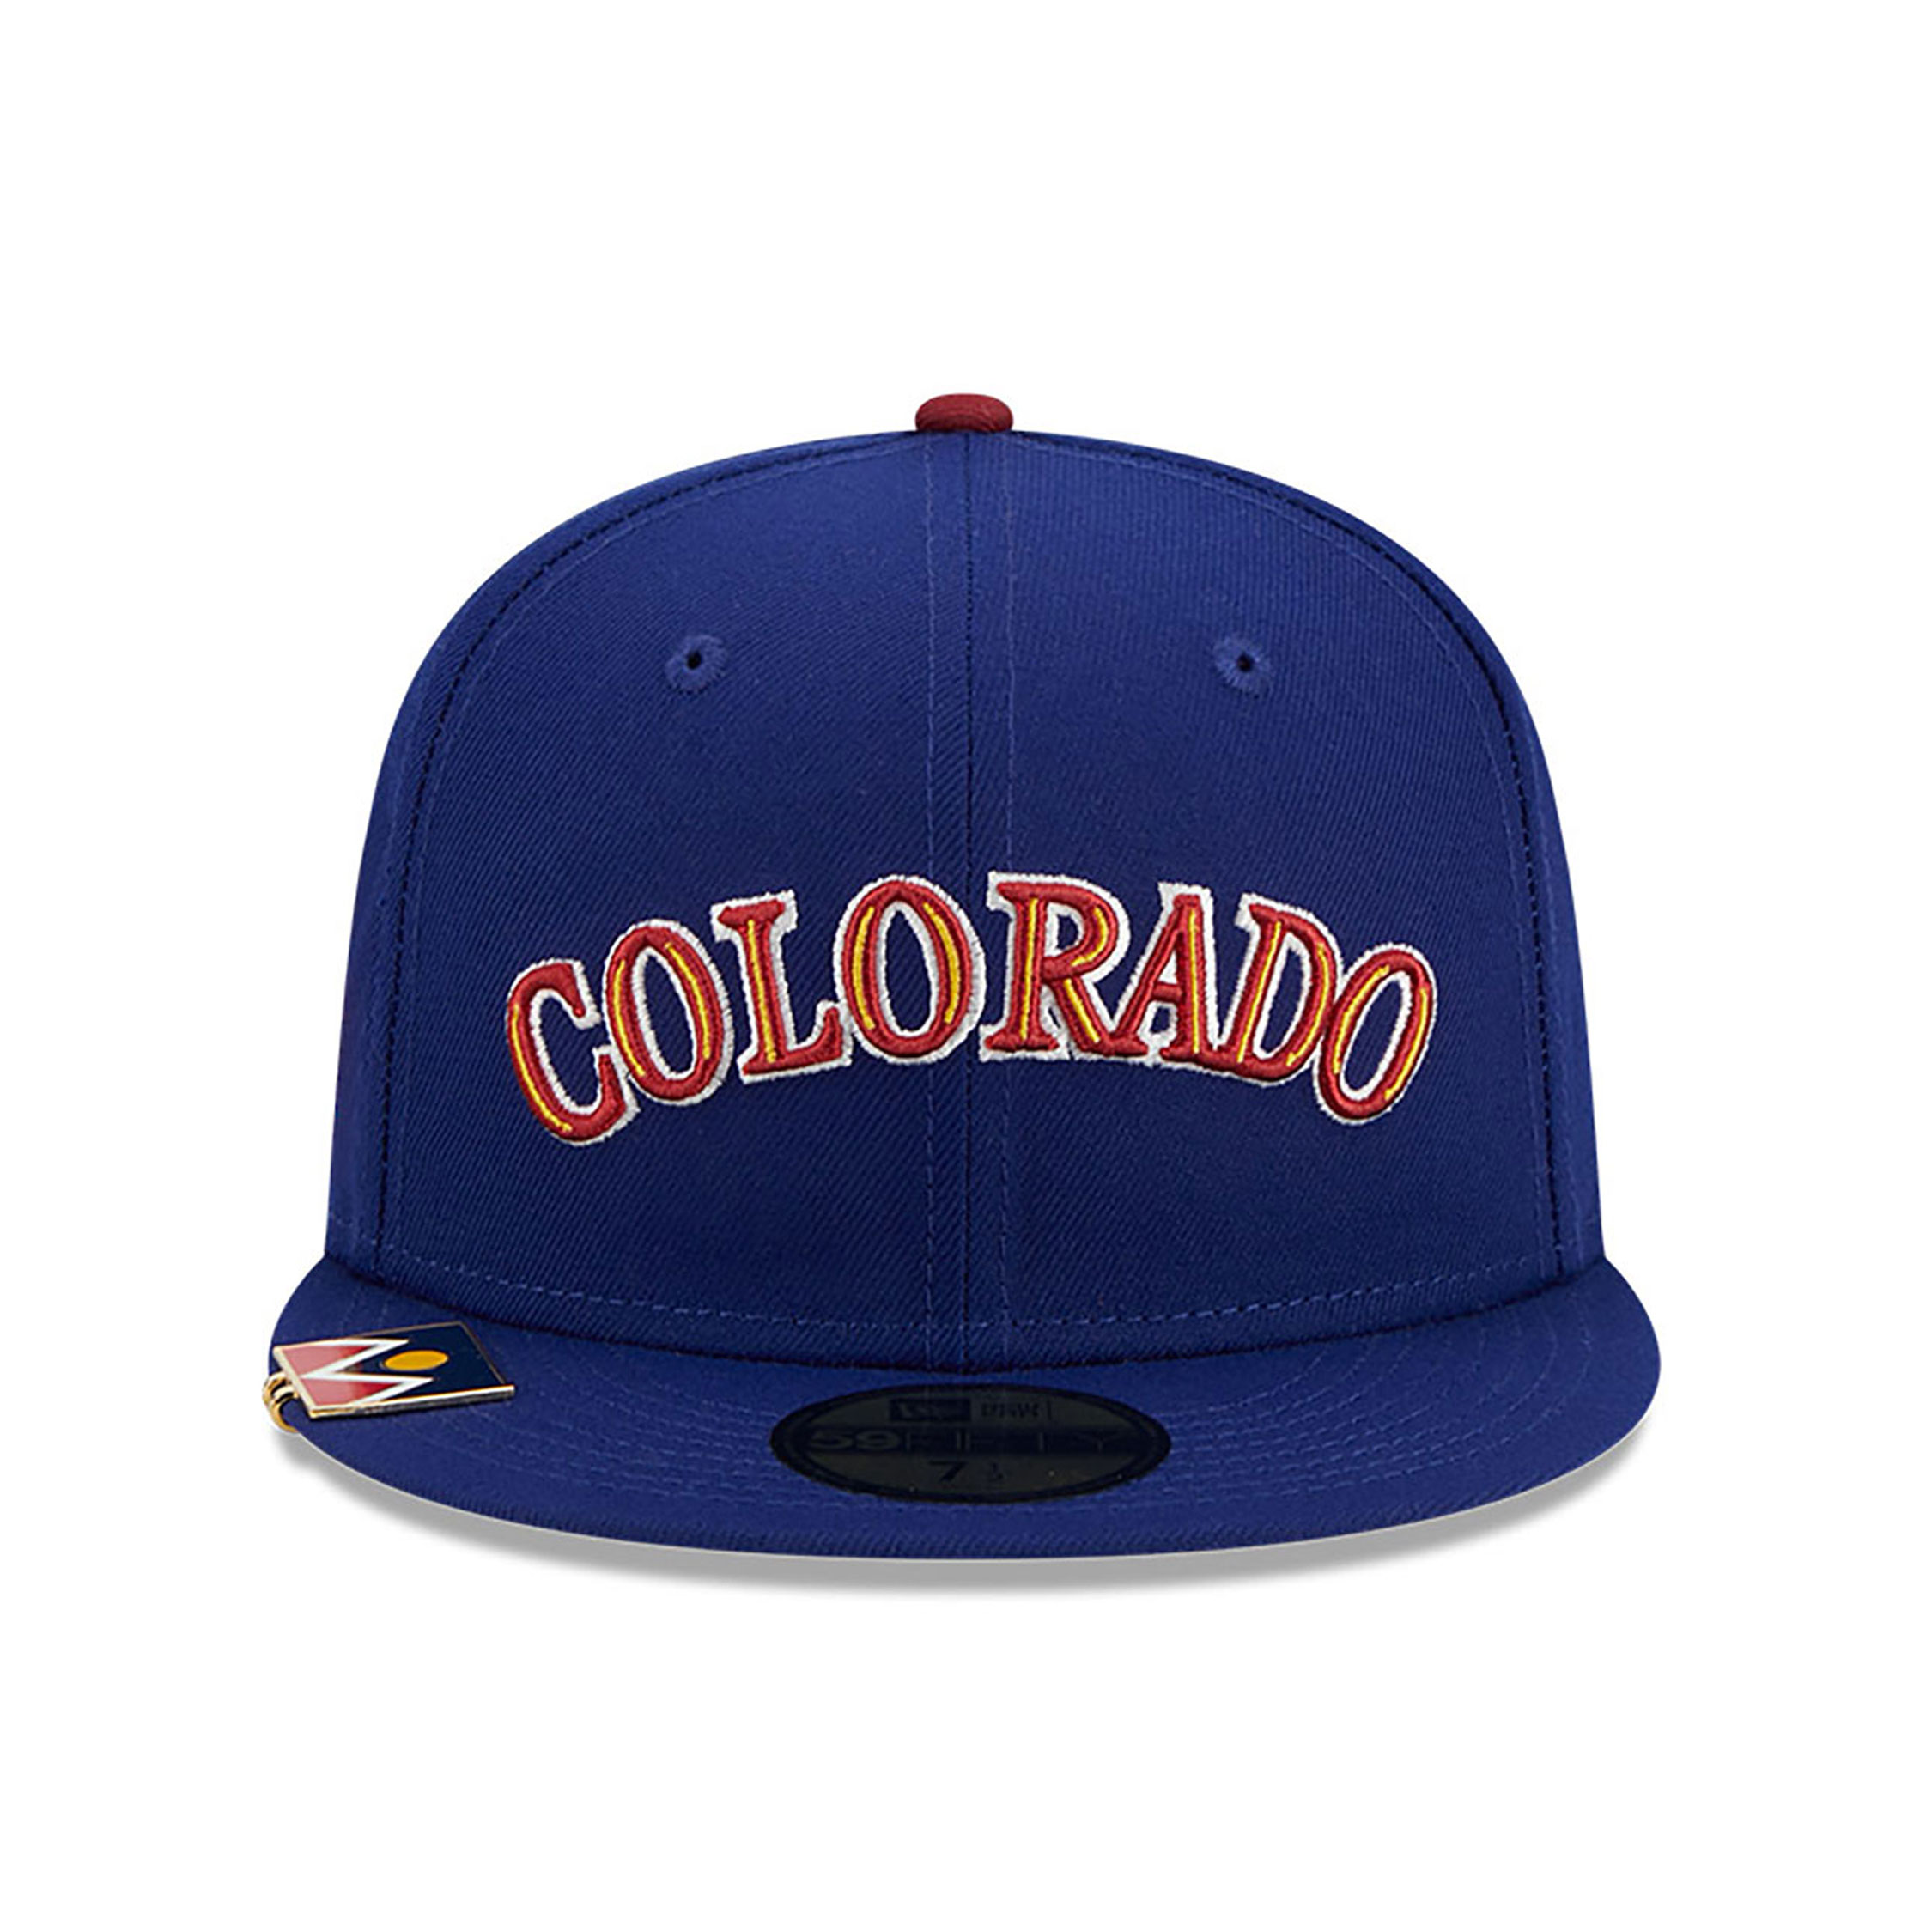 Colorado Rockies City Flag Dark Blue 59FIFTY Fitted Cap